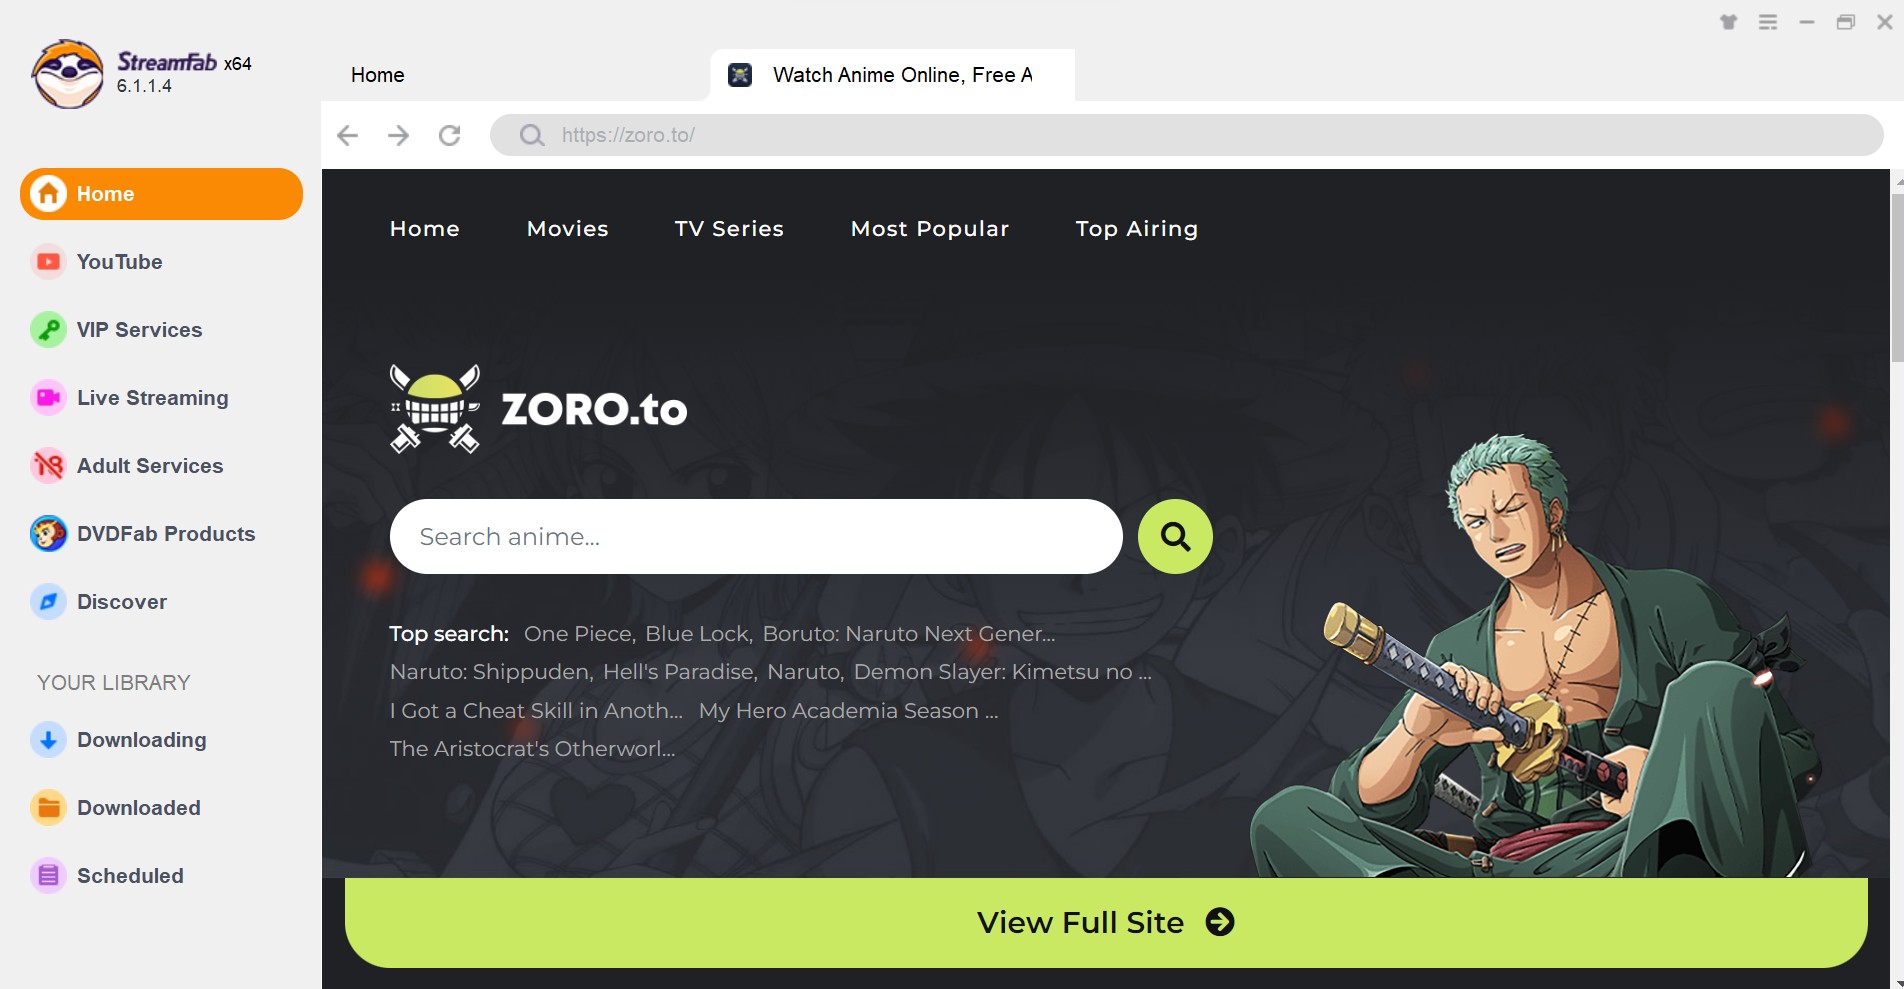 Is Zoro.to Safe and Legit to Watch Anime Online? | TechLatest